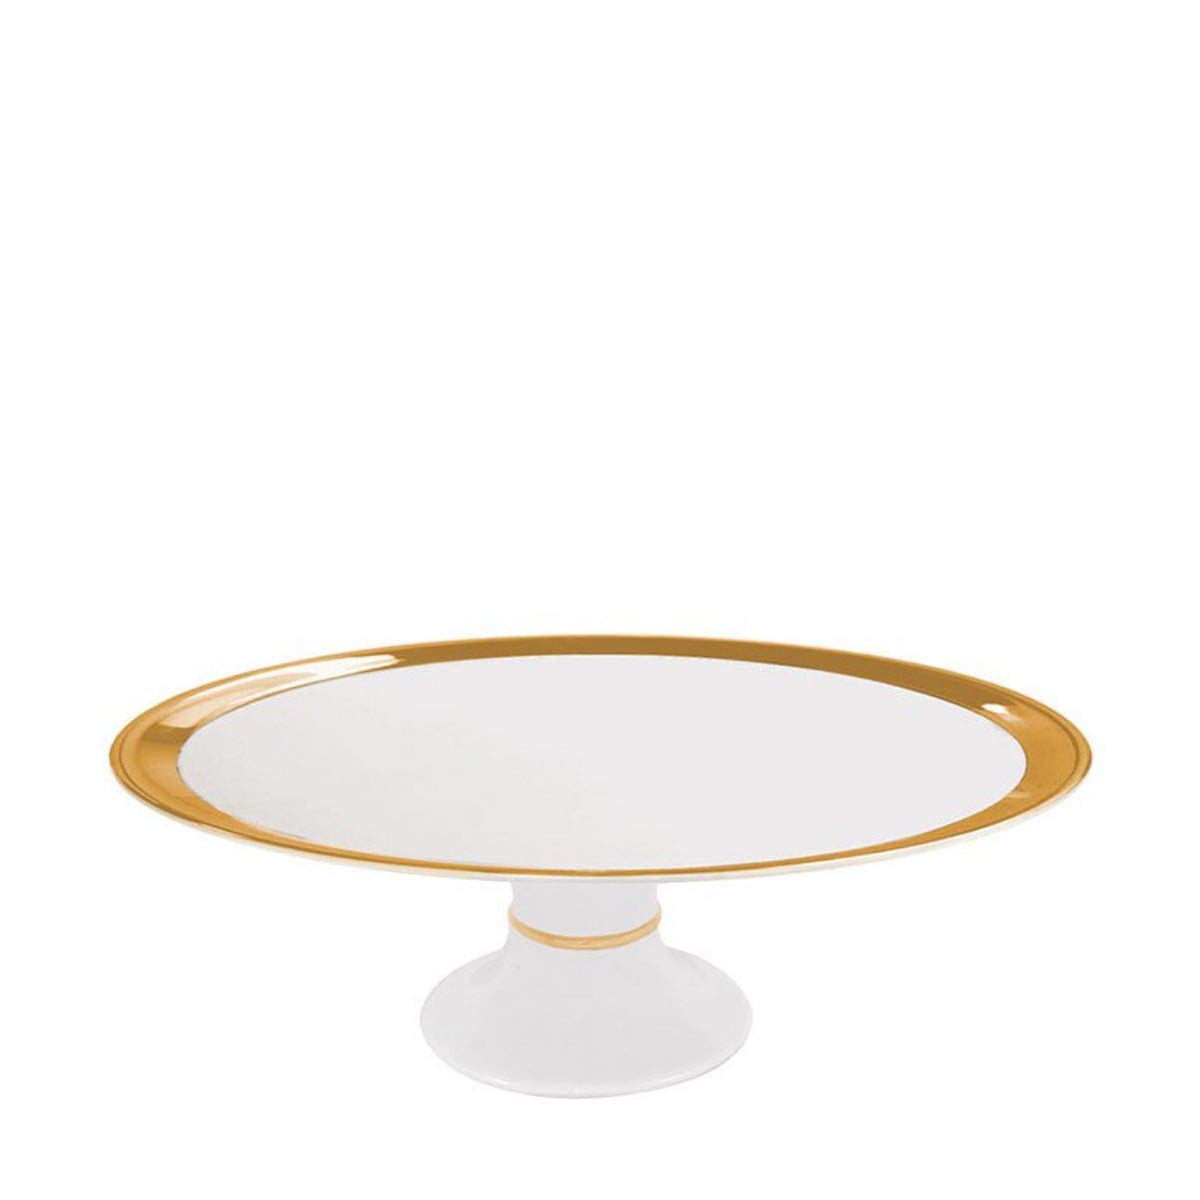 PREMIUM GOLD FOOTED PLATE 31CM